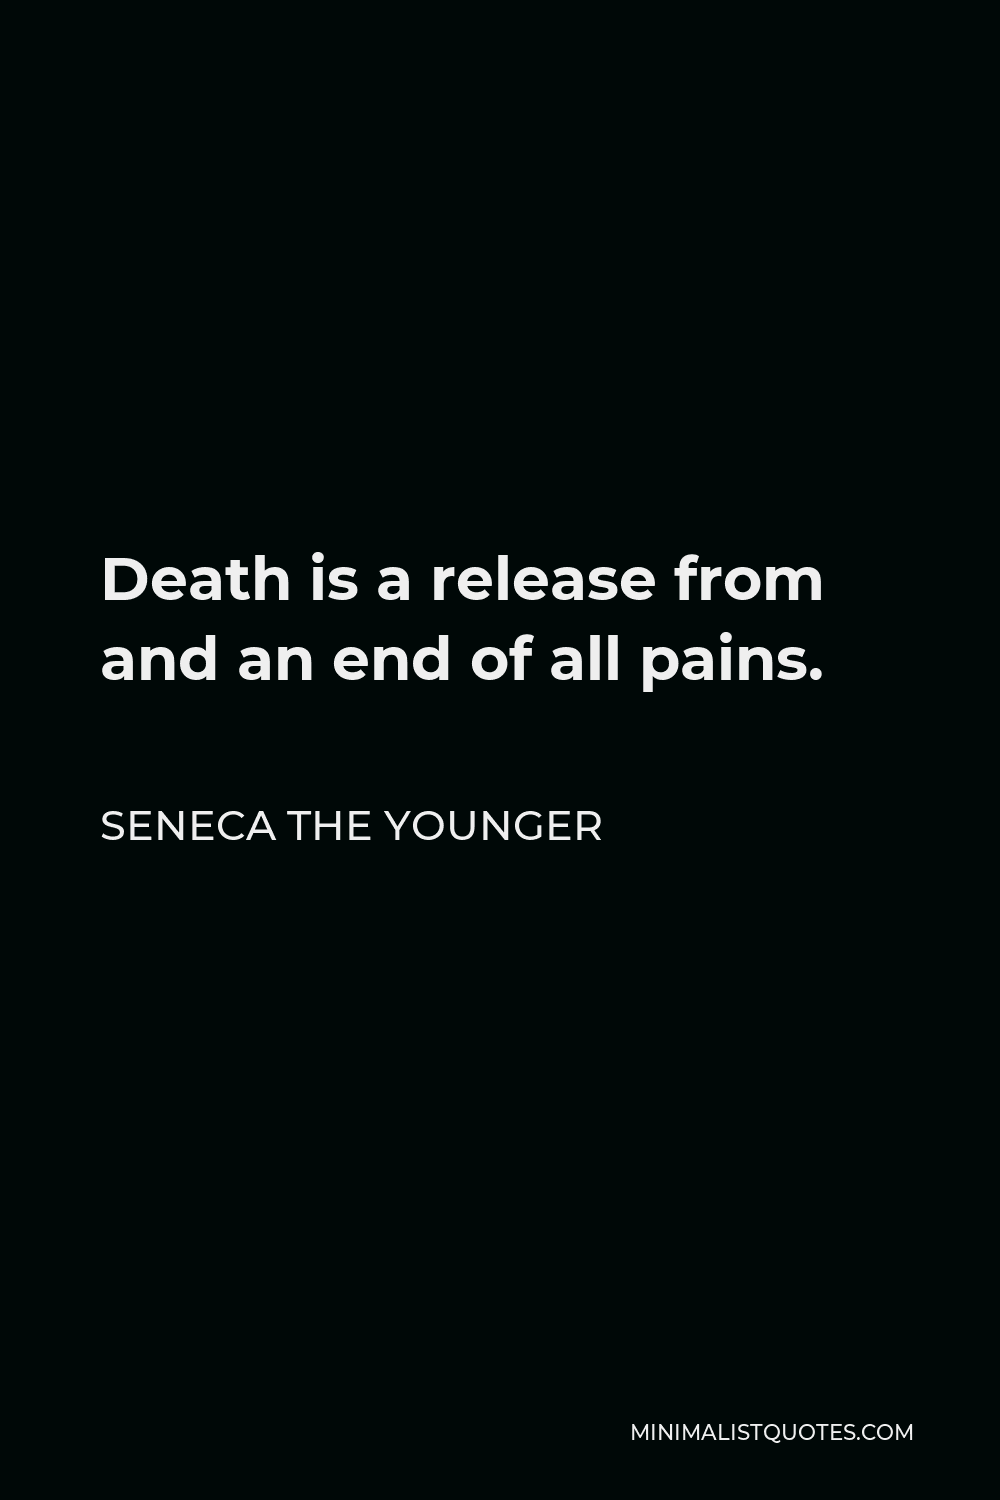 Seneca the Younger Quote - Death is a release from and an end of all pains.